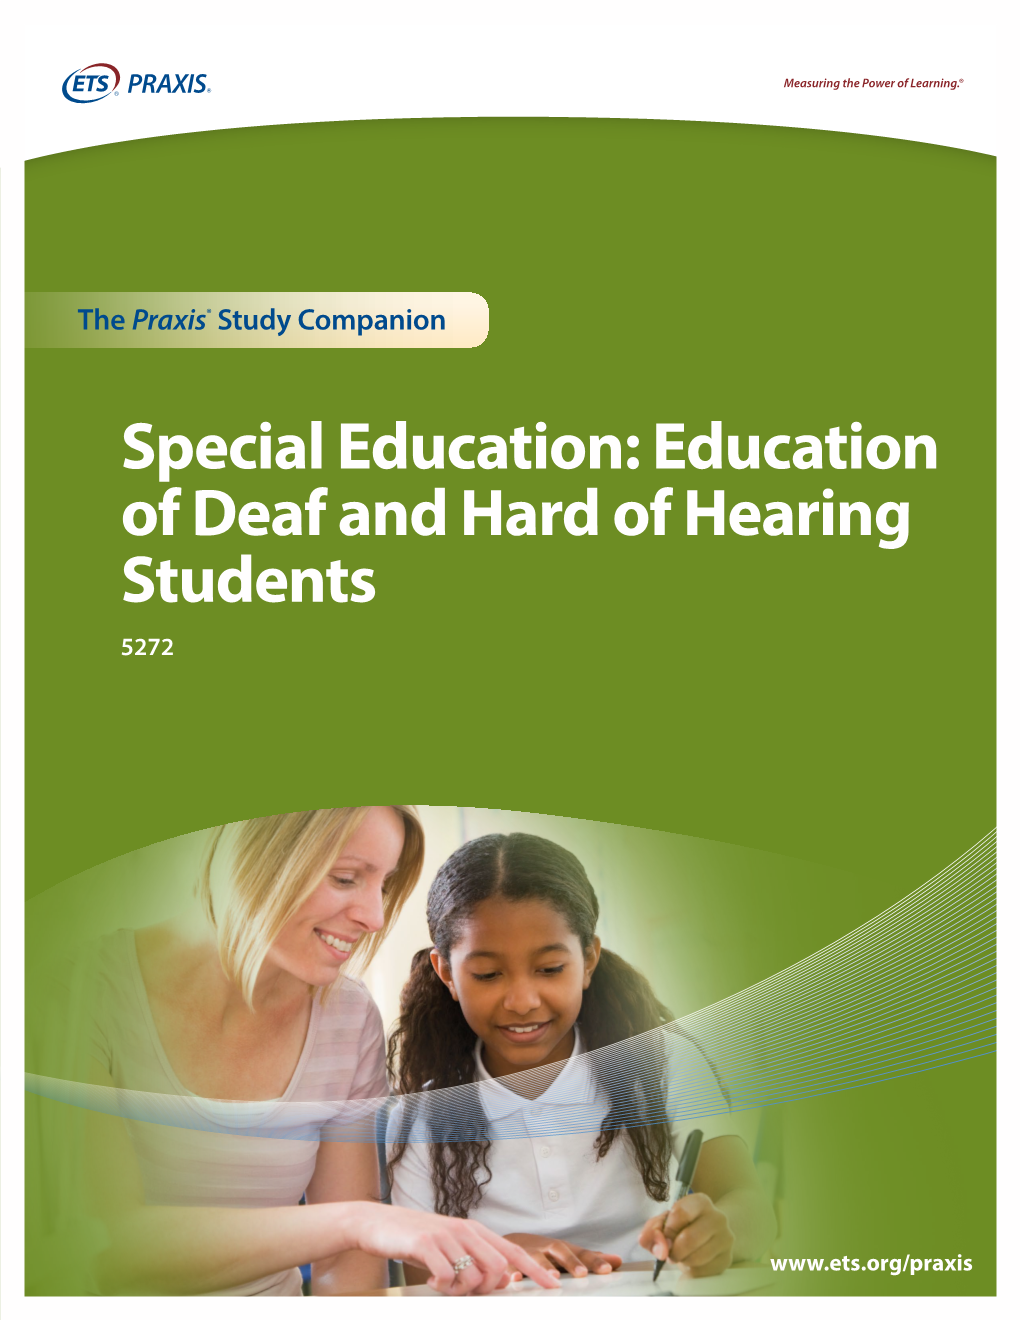 Special Education: Education of Deaf and Hard of Hearing Students Study Companion